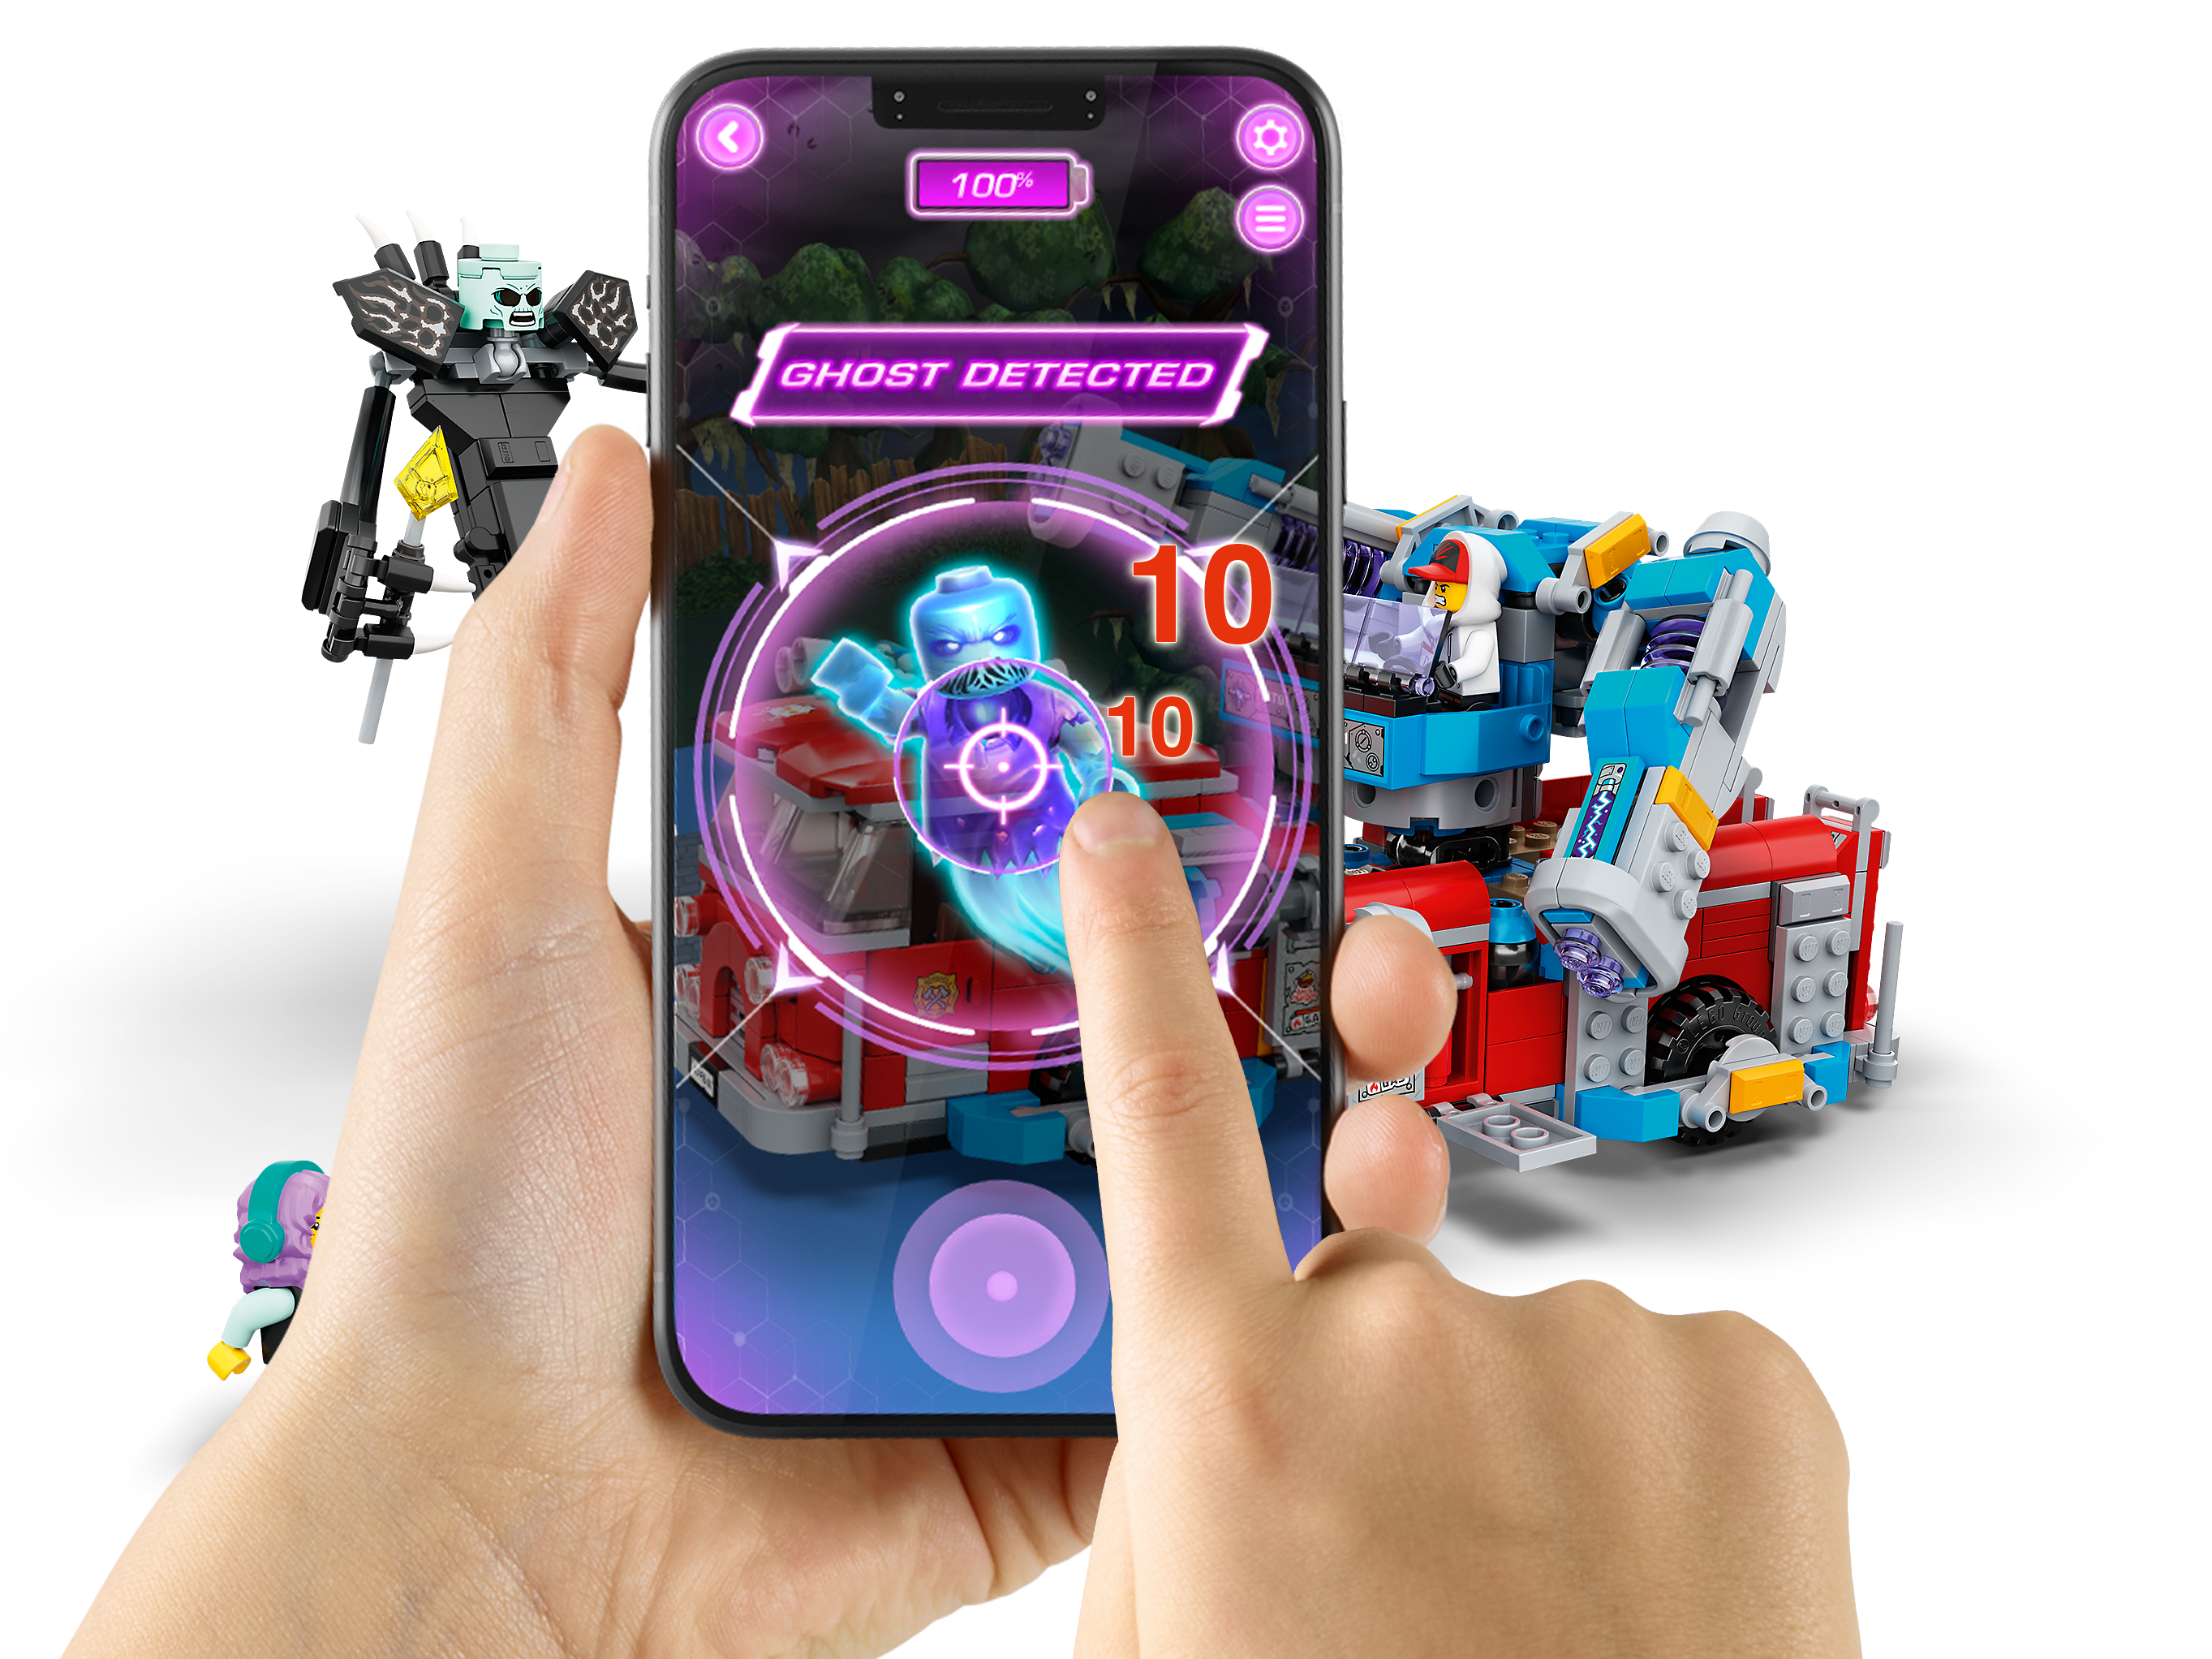 App-Driven Ghost-Hunting Kit Augmented Reality Includes a Mecha Robot LEGO Hidden Side Phantom Fire Truck 3000 70436 New 2020 5 Minifigures and a Harbinger Figure AR Fire Truck Toy 760 Pieces